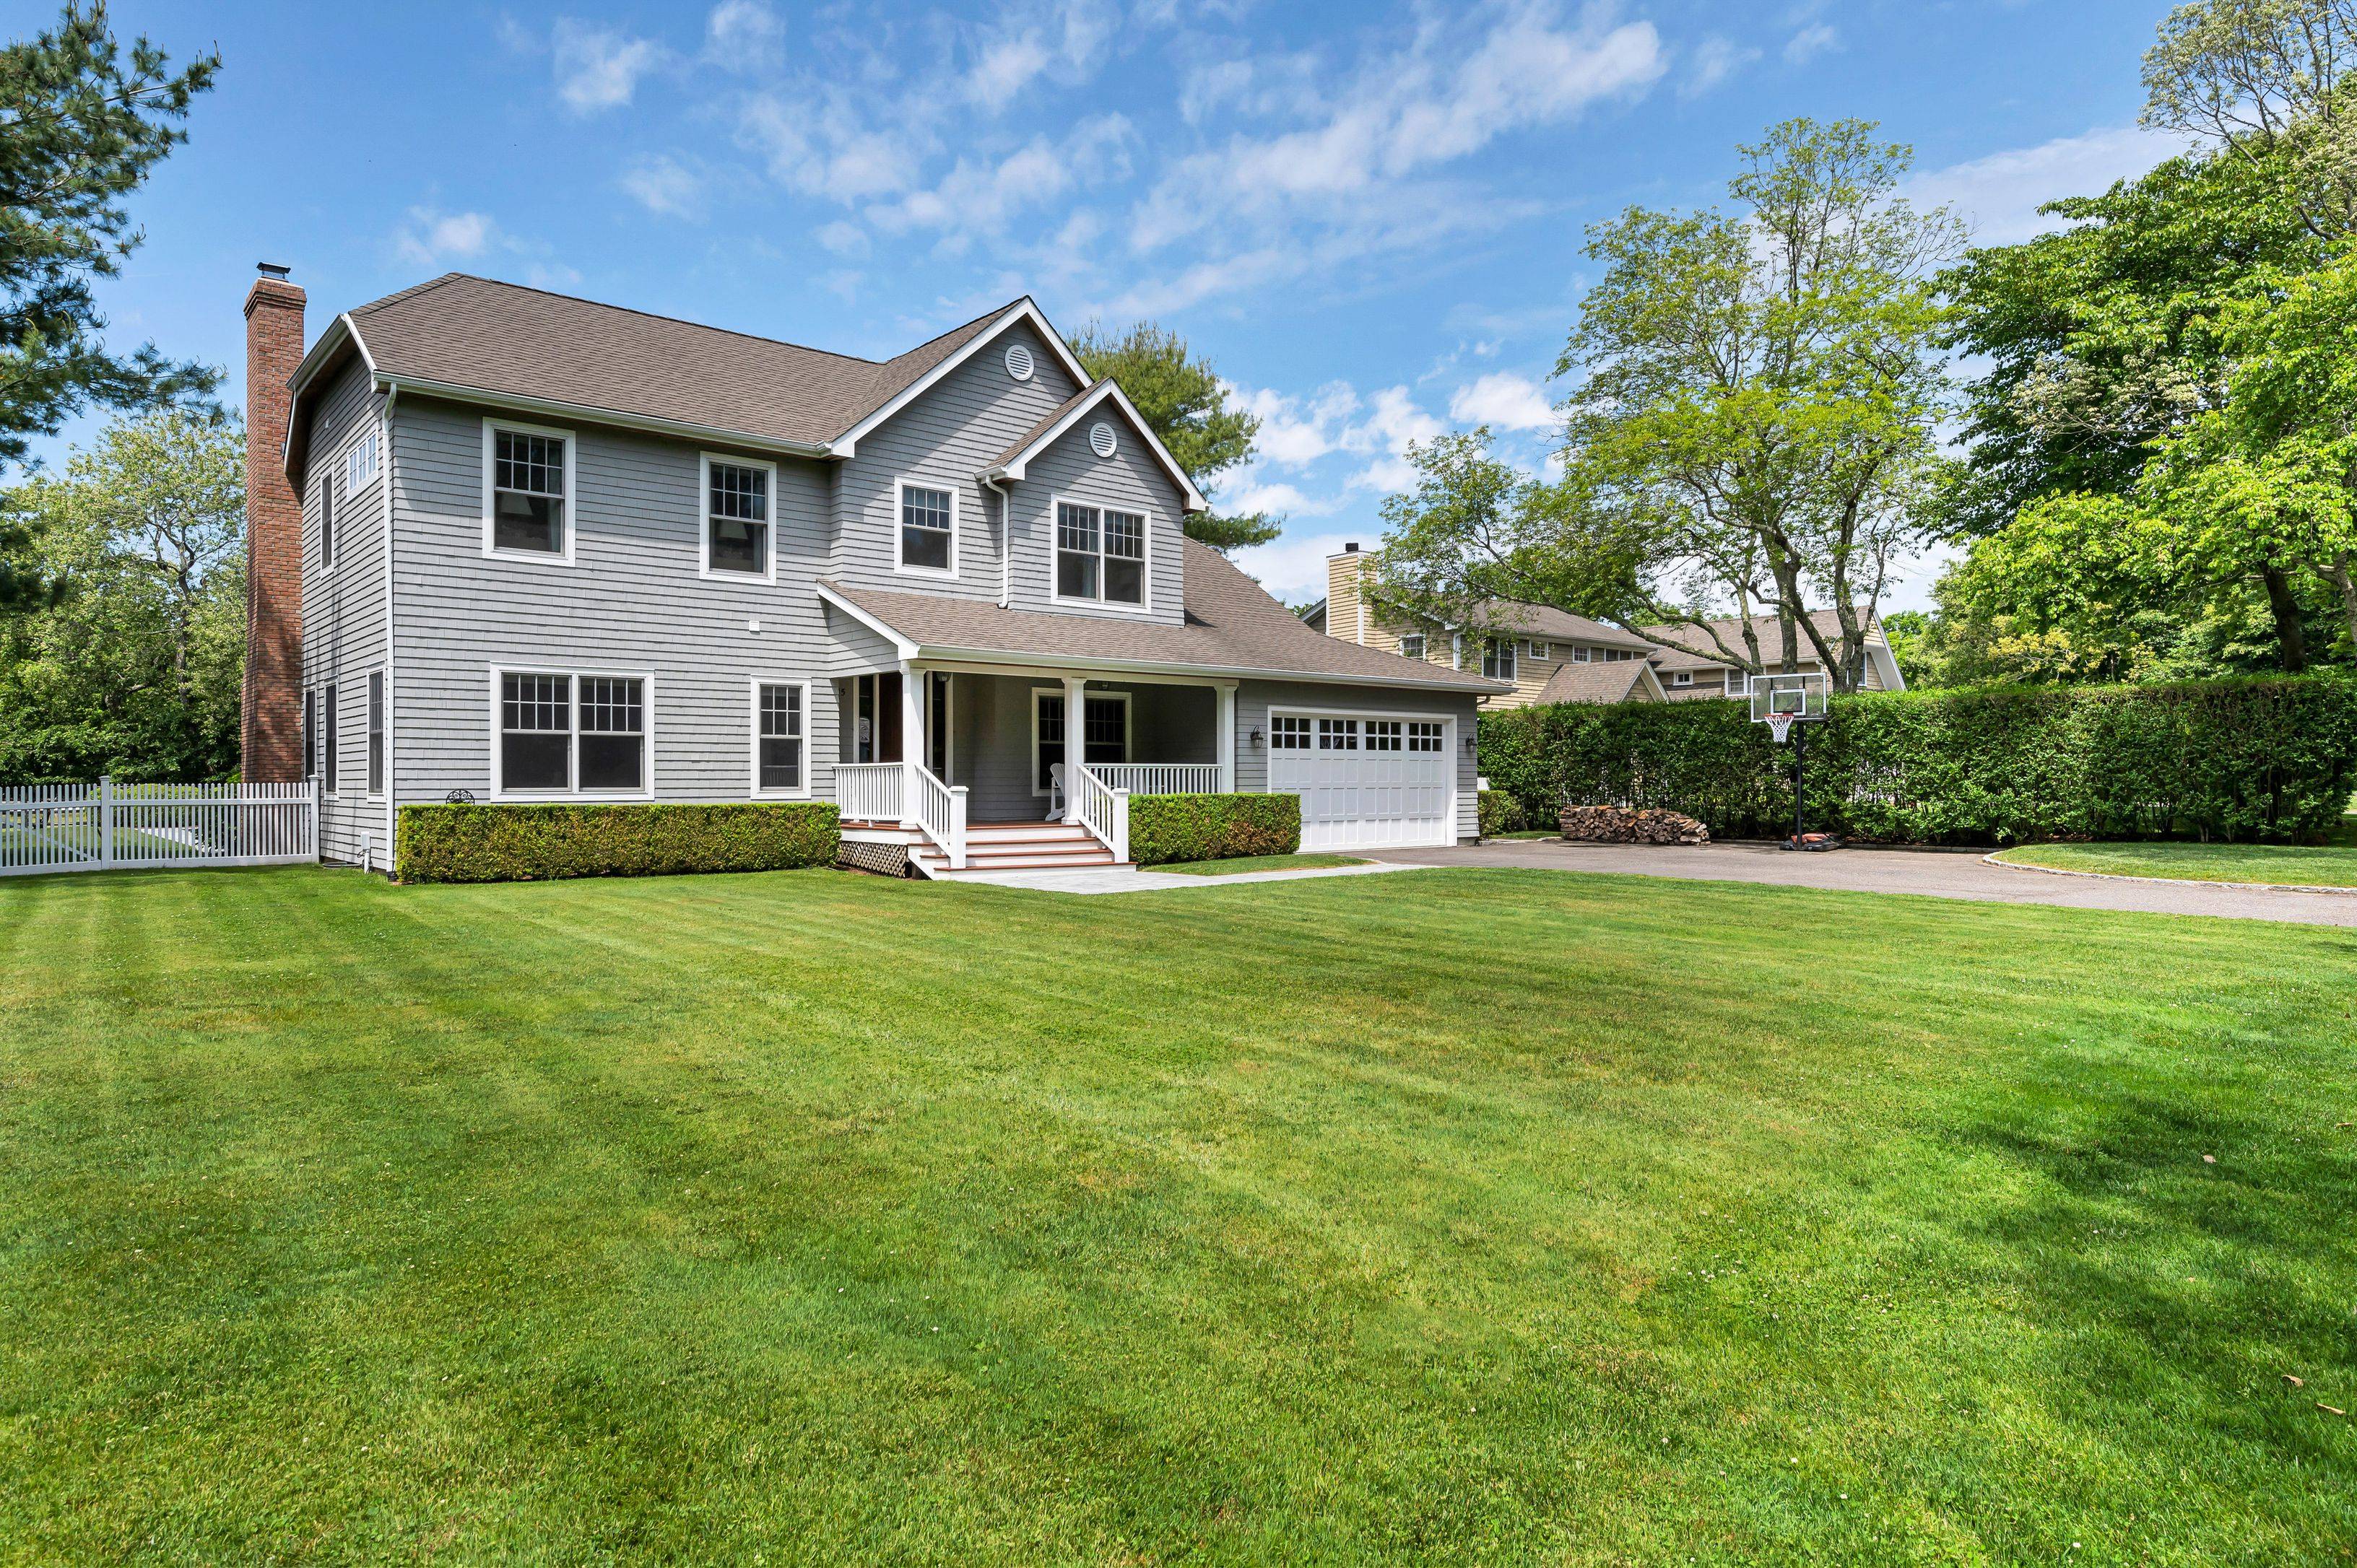 Don't Miss! Amazing East Hampton Rental close to All!